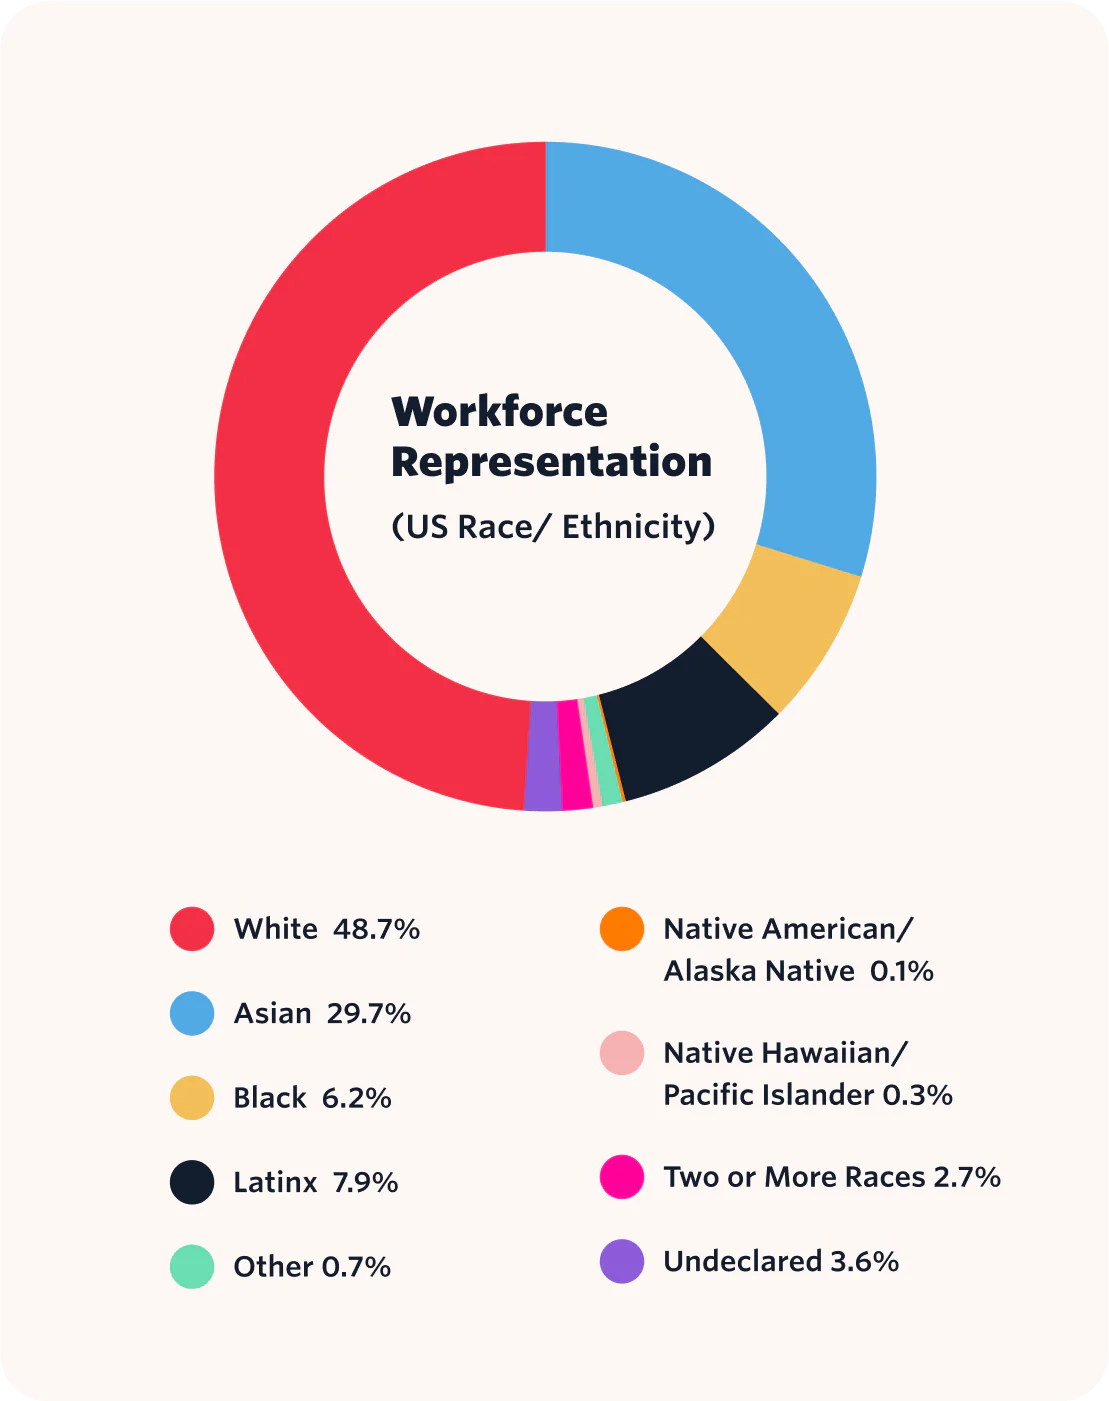 Workforce Representation (US Race/ Ethnicity) data represented in a pie chart.